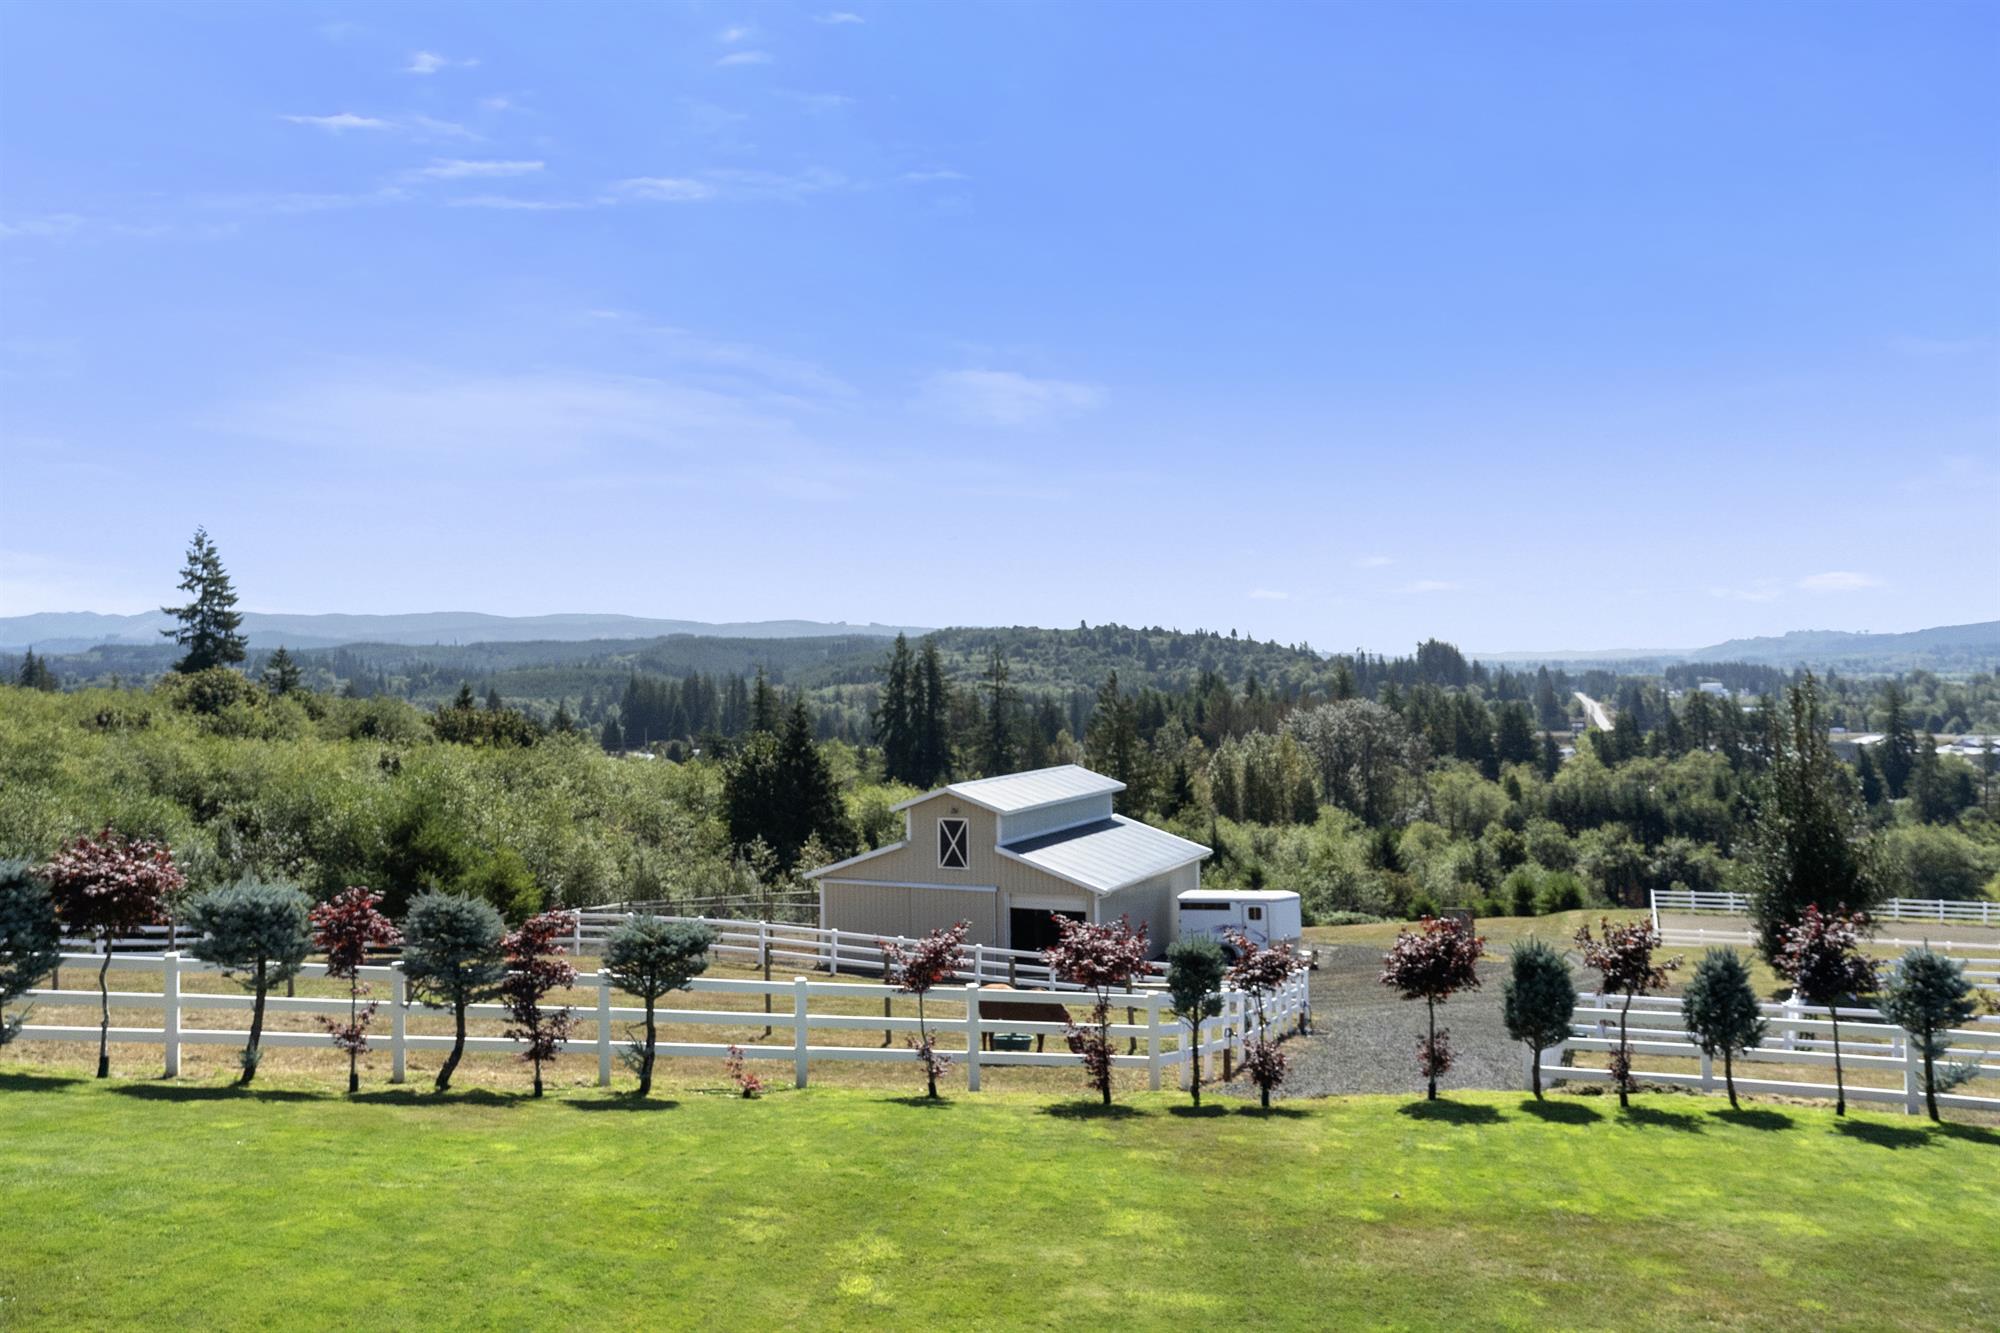 The equestrian facilities have all been added to the property in the past few years
